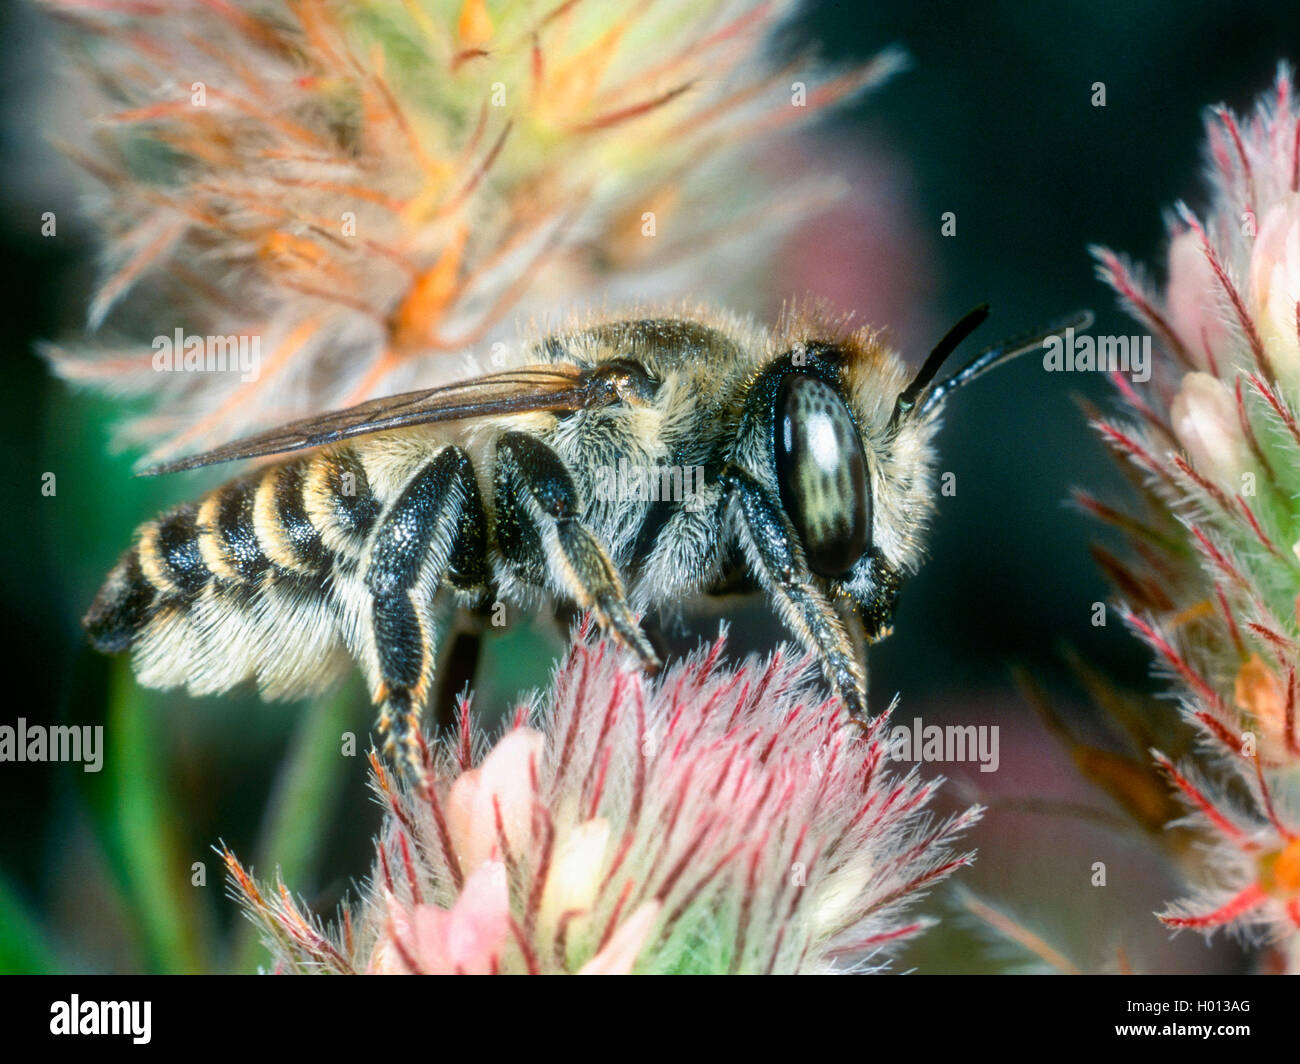 Silver Leaf-cutter Bee (Megachile leachella), Female foraging on Haresfoot Clover (Trifolium arvense), Germany Stock Photo